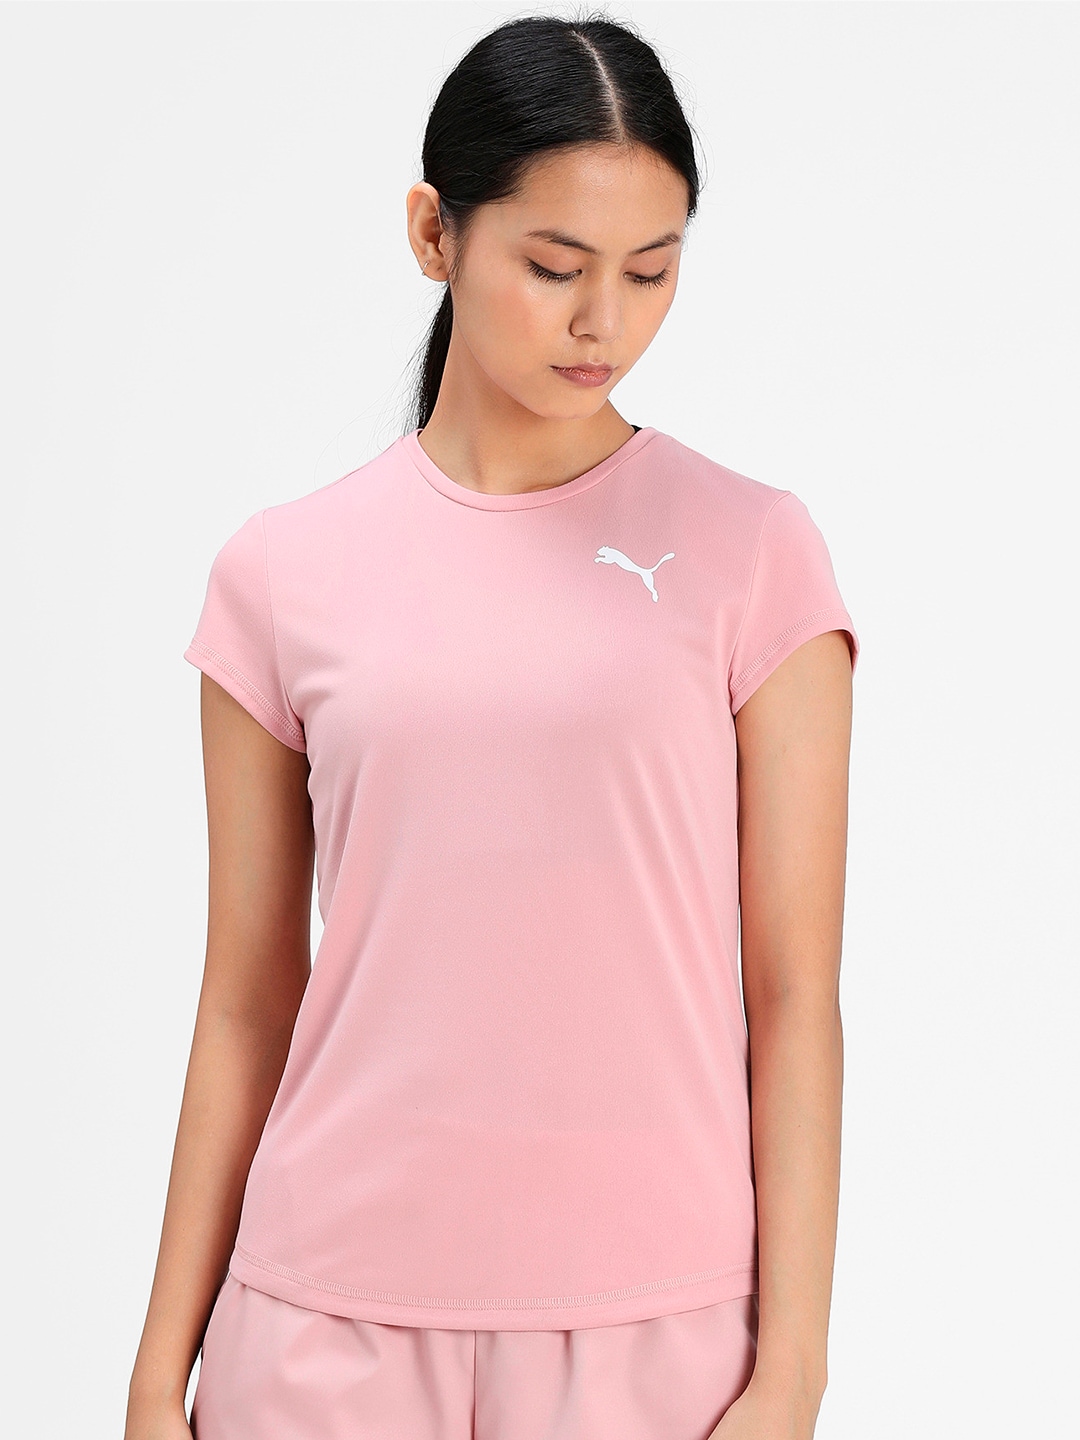 Puma Women Pink Solid Round Neck Active T-shirt Price in India